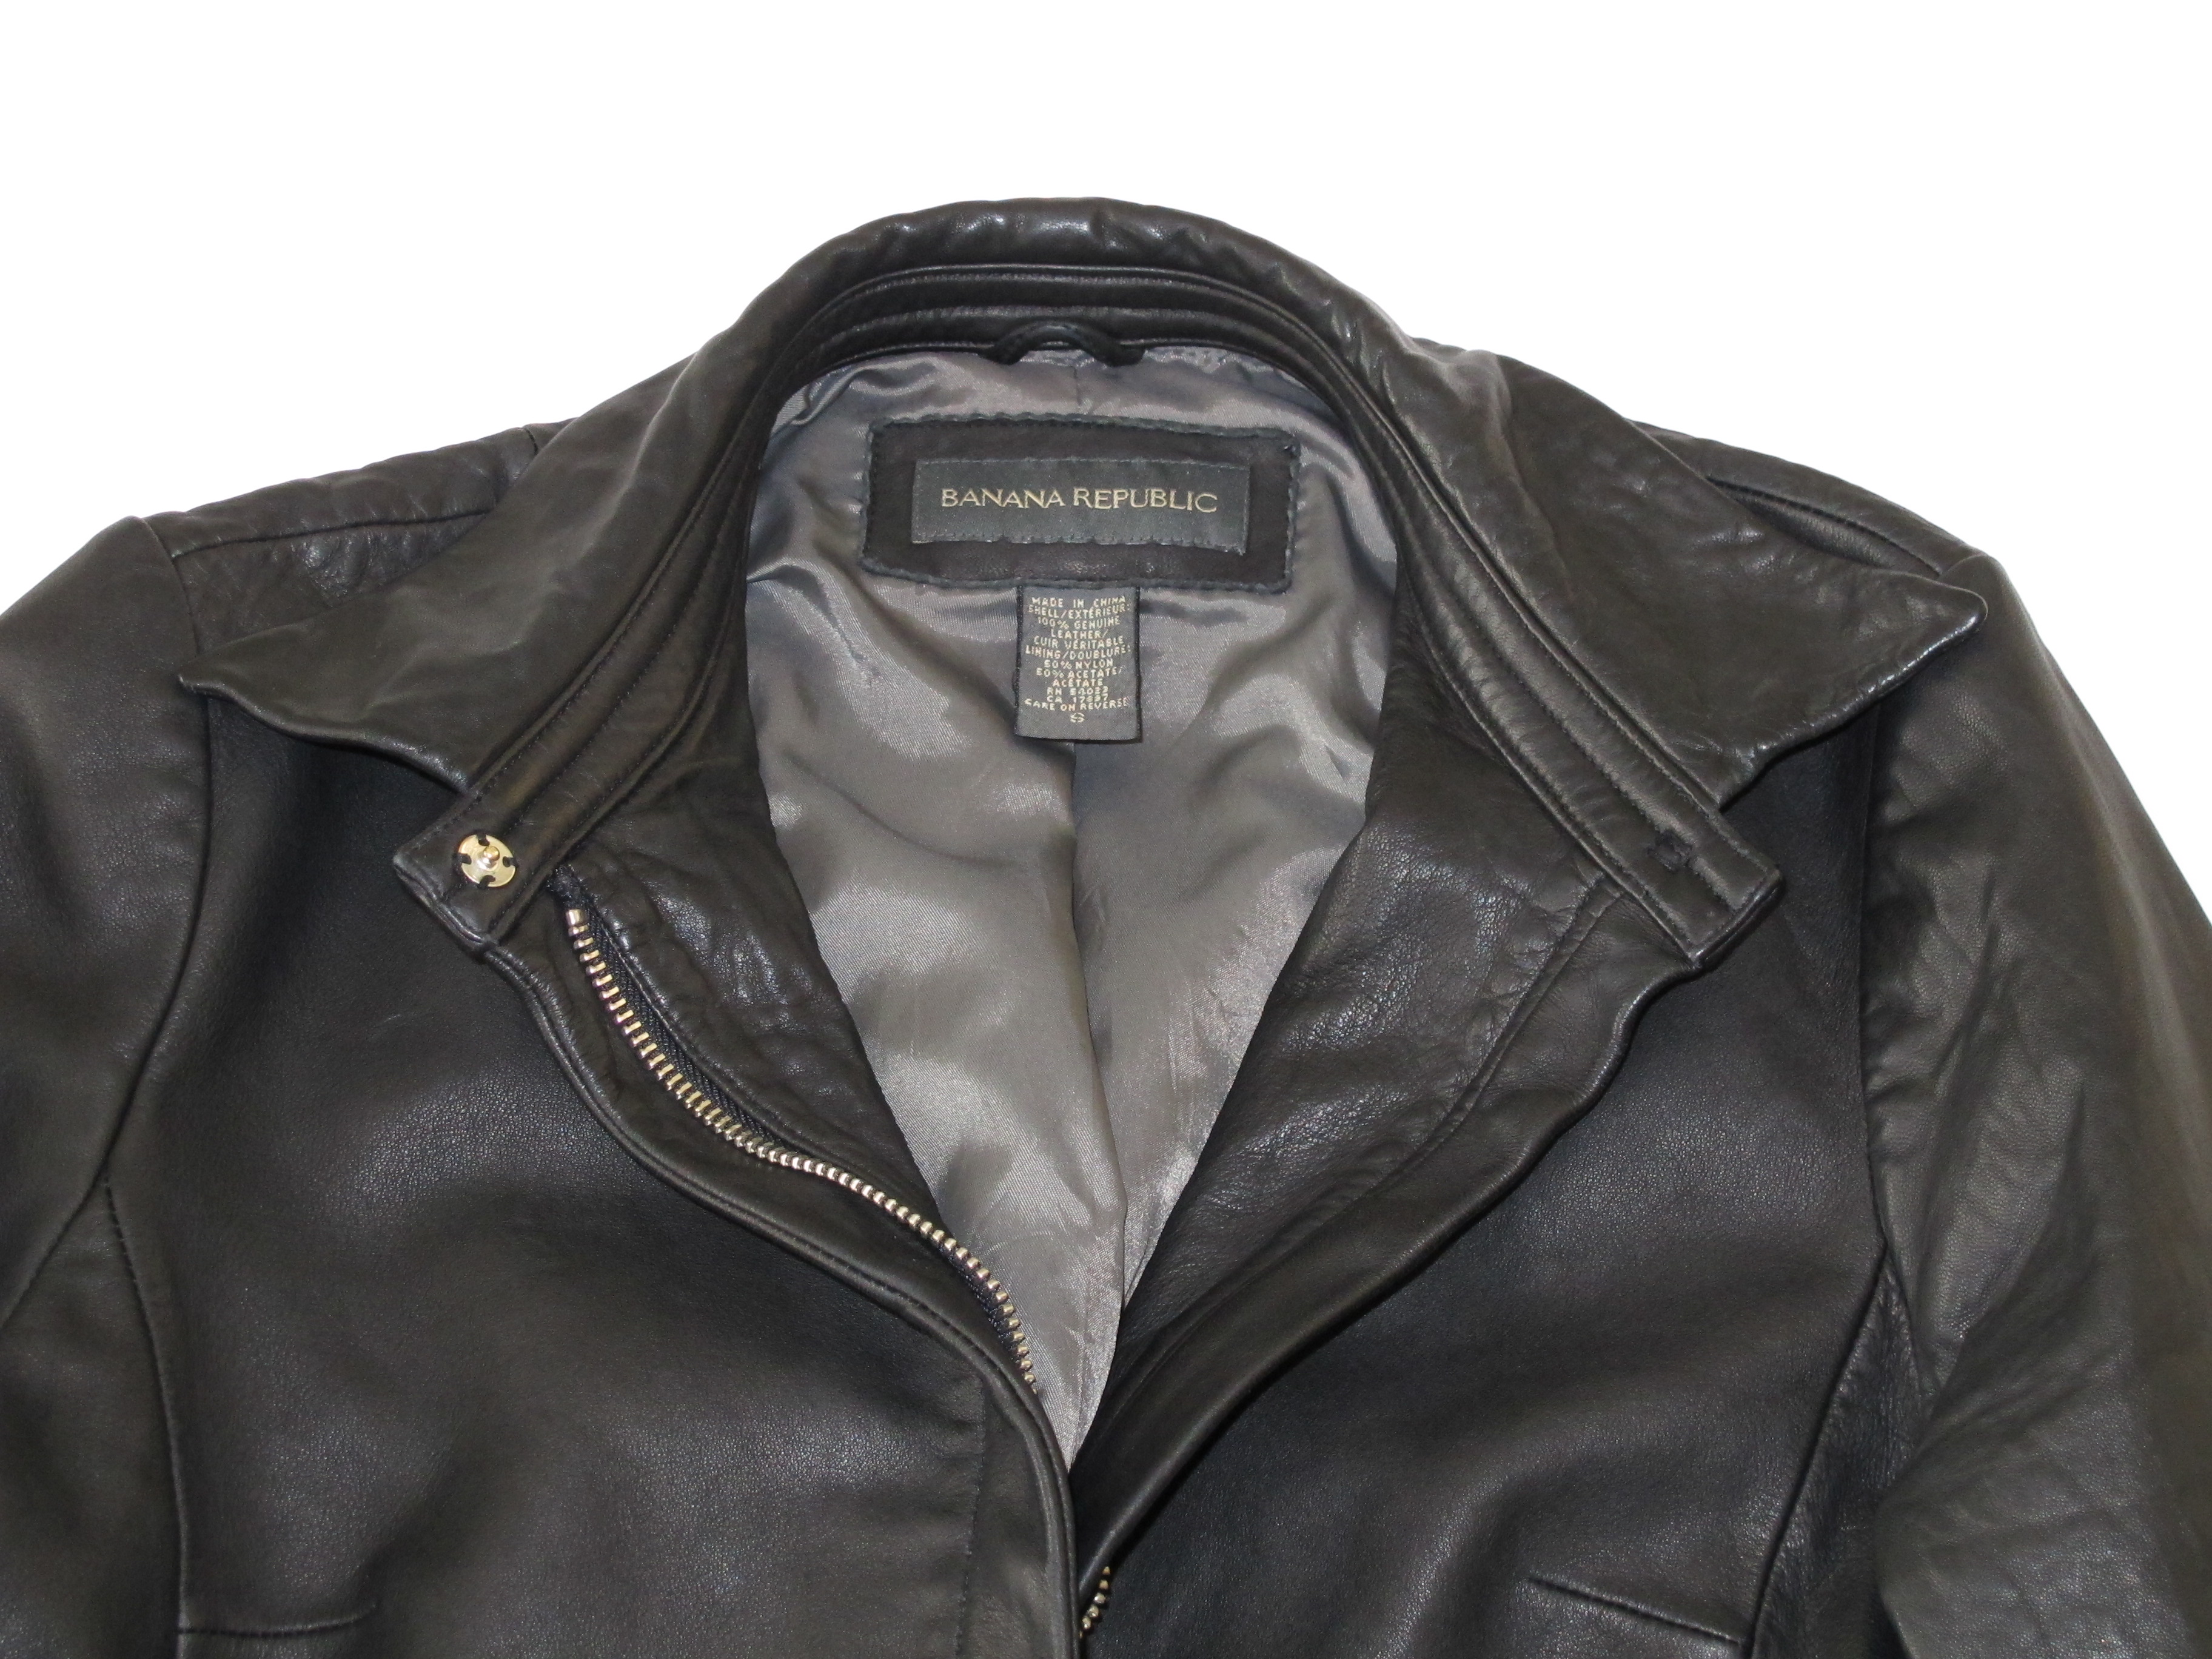 How To Distress Leather Jacket?